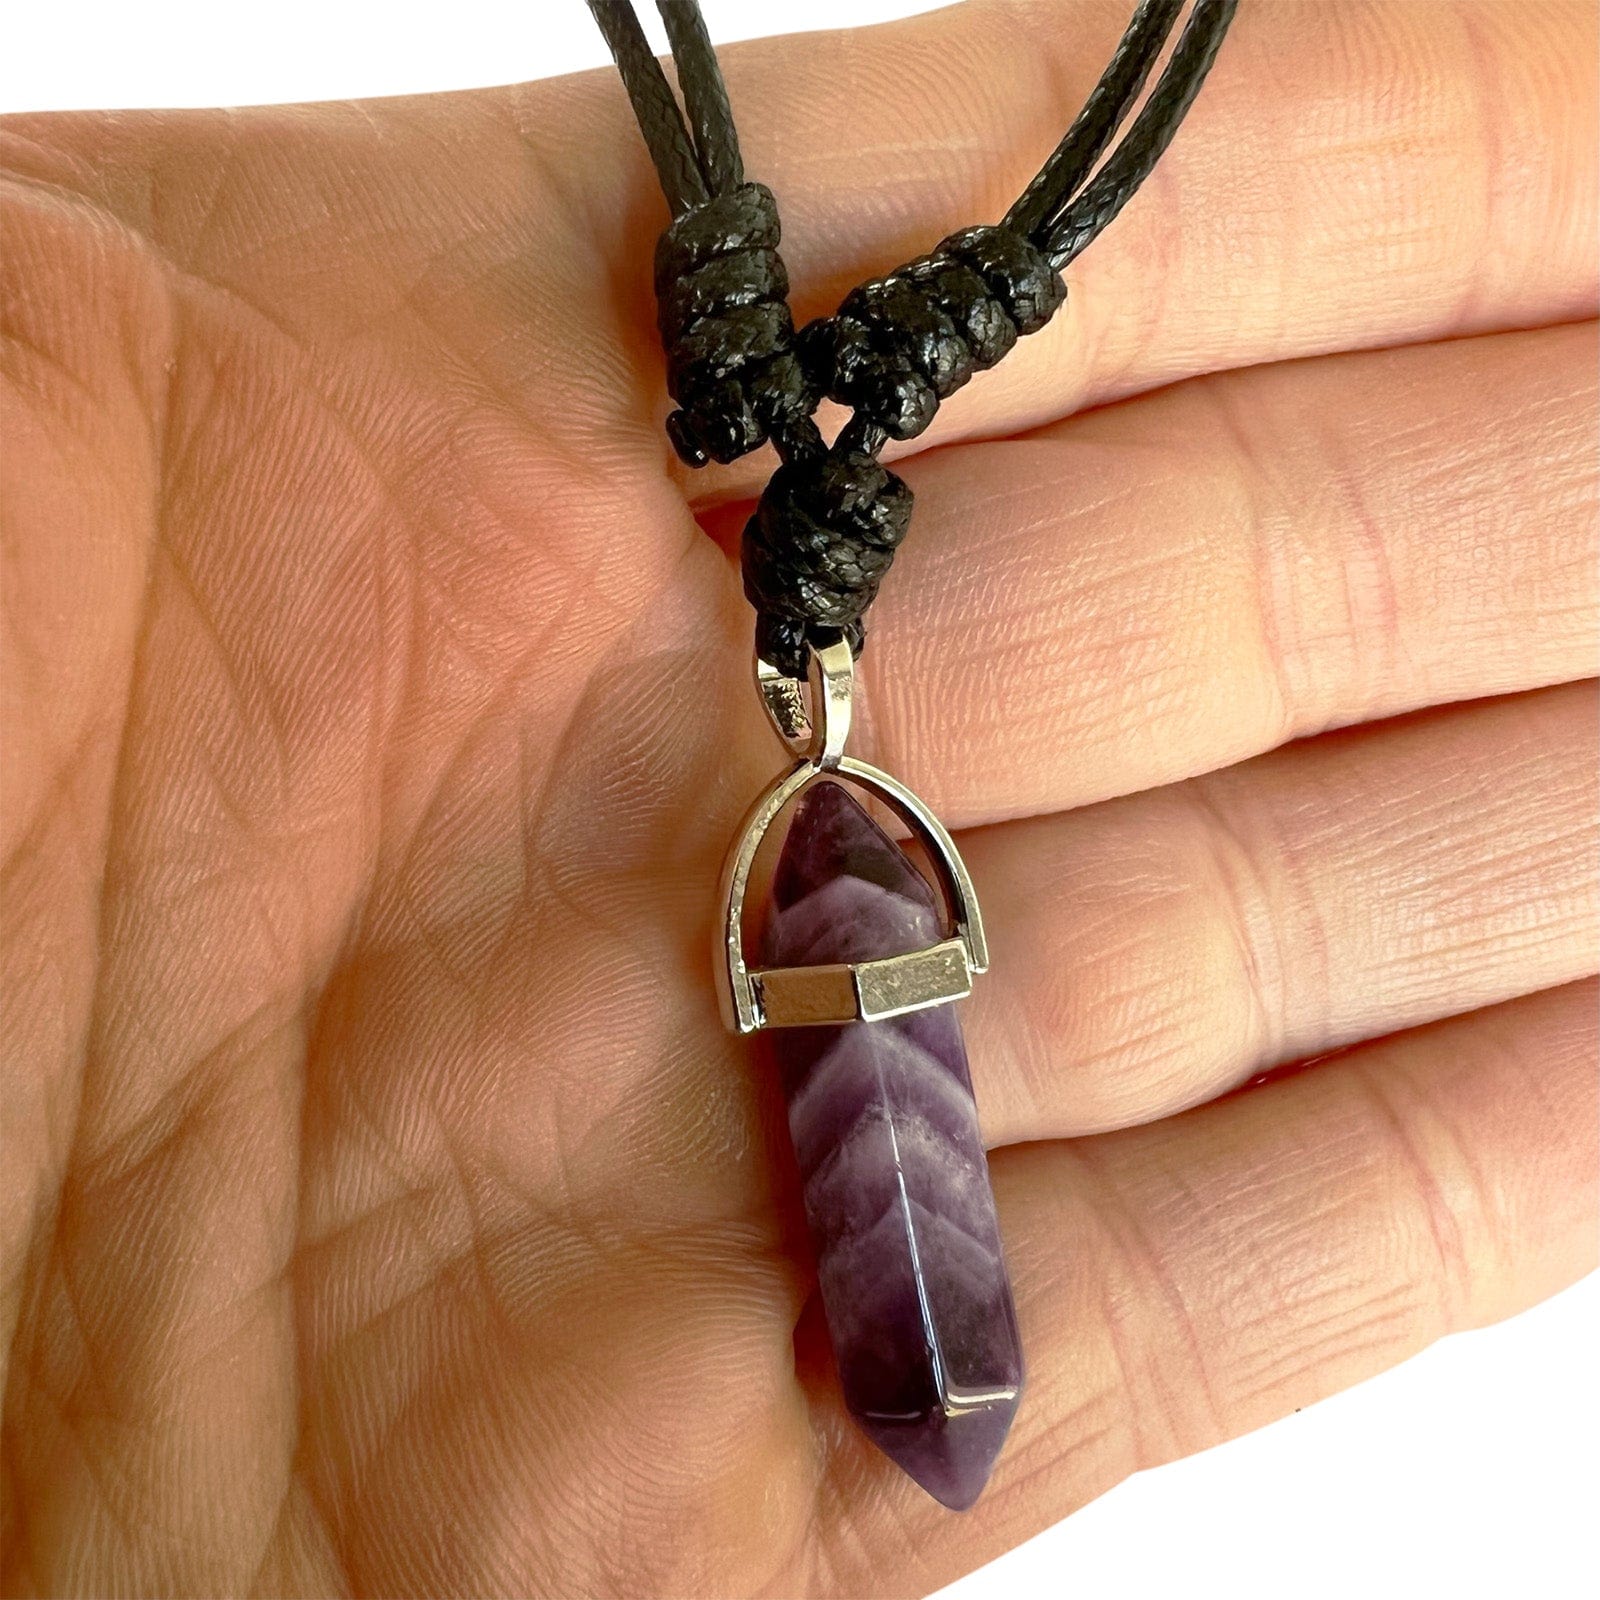 Dropship Fashion 16mm Natural Obsidian Pendant Amethyst Necklace For Men  And Women to Sell Online at a Lower Price | Doba